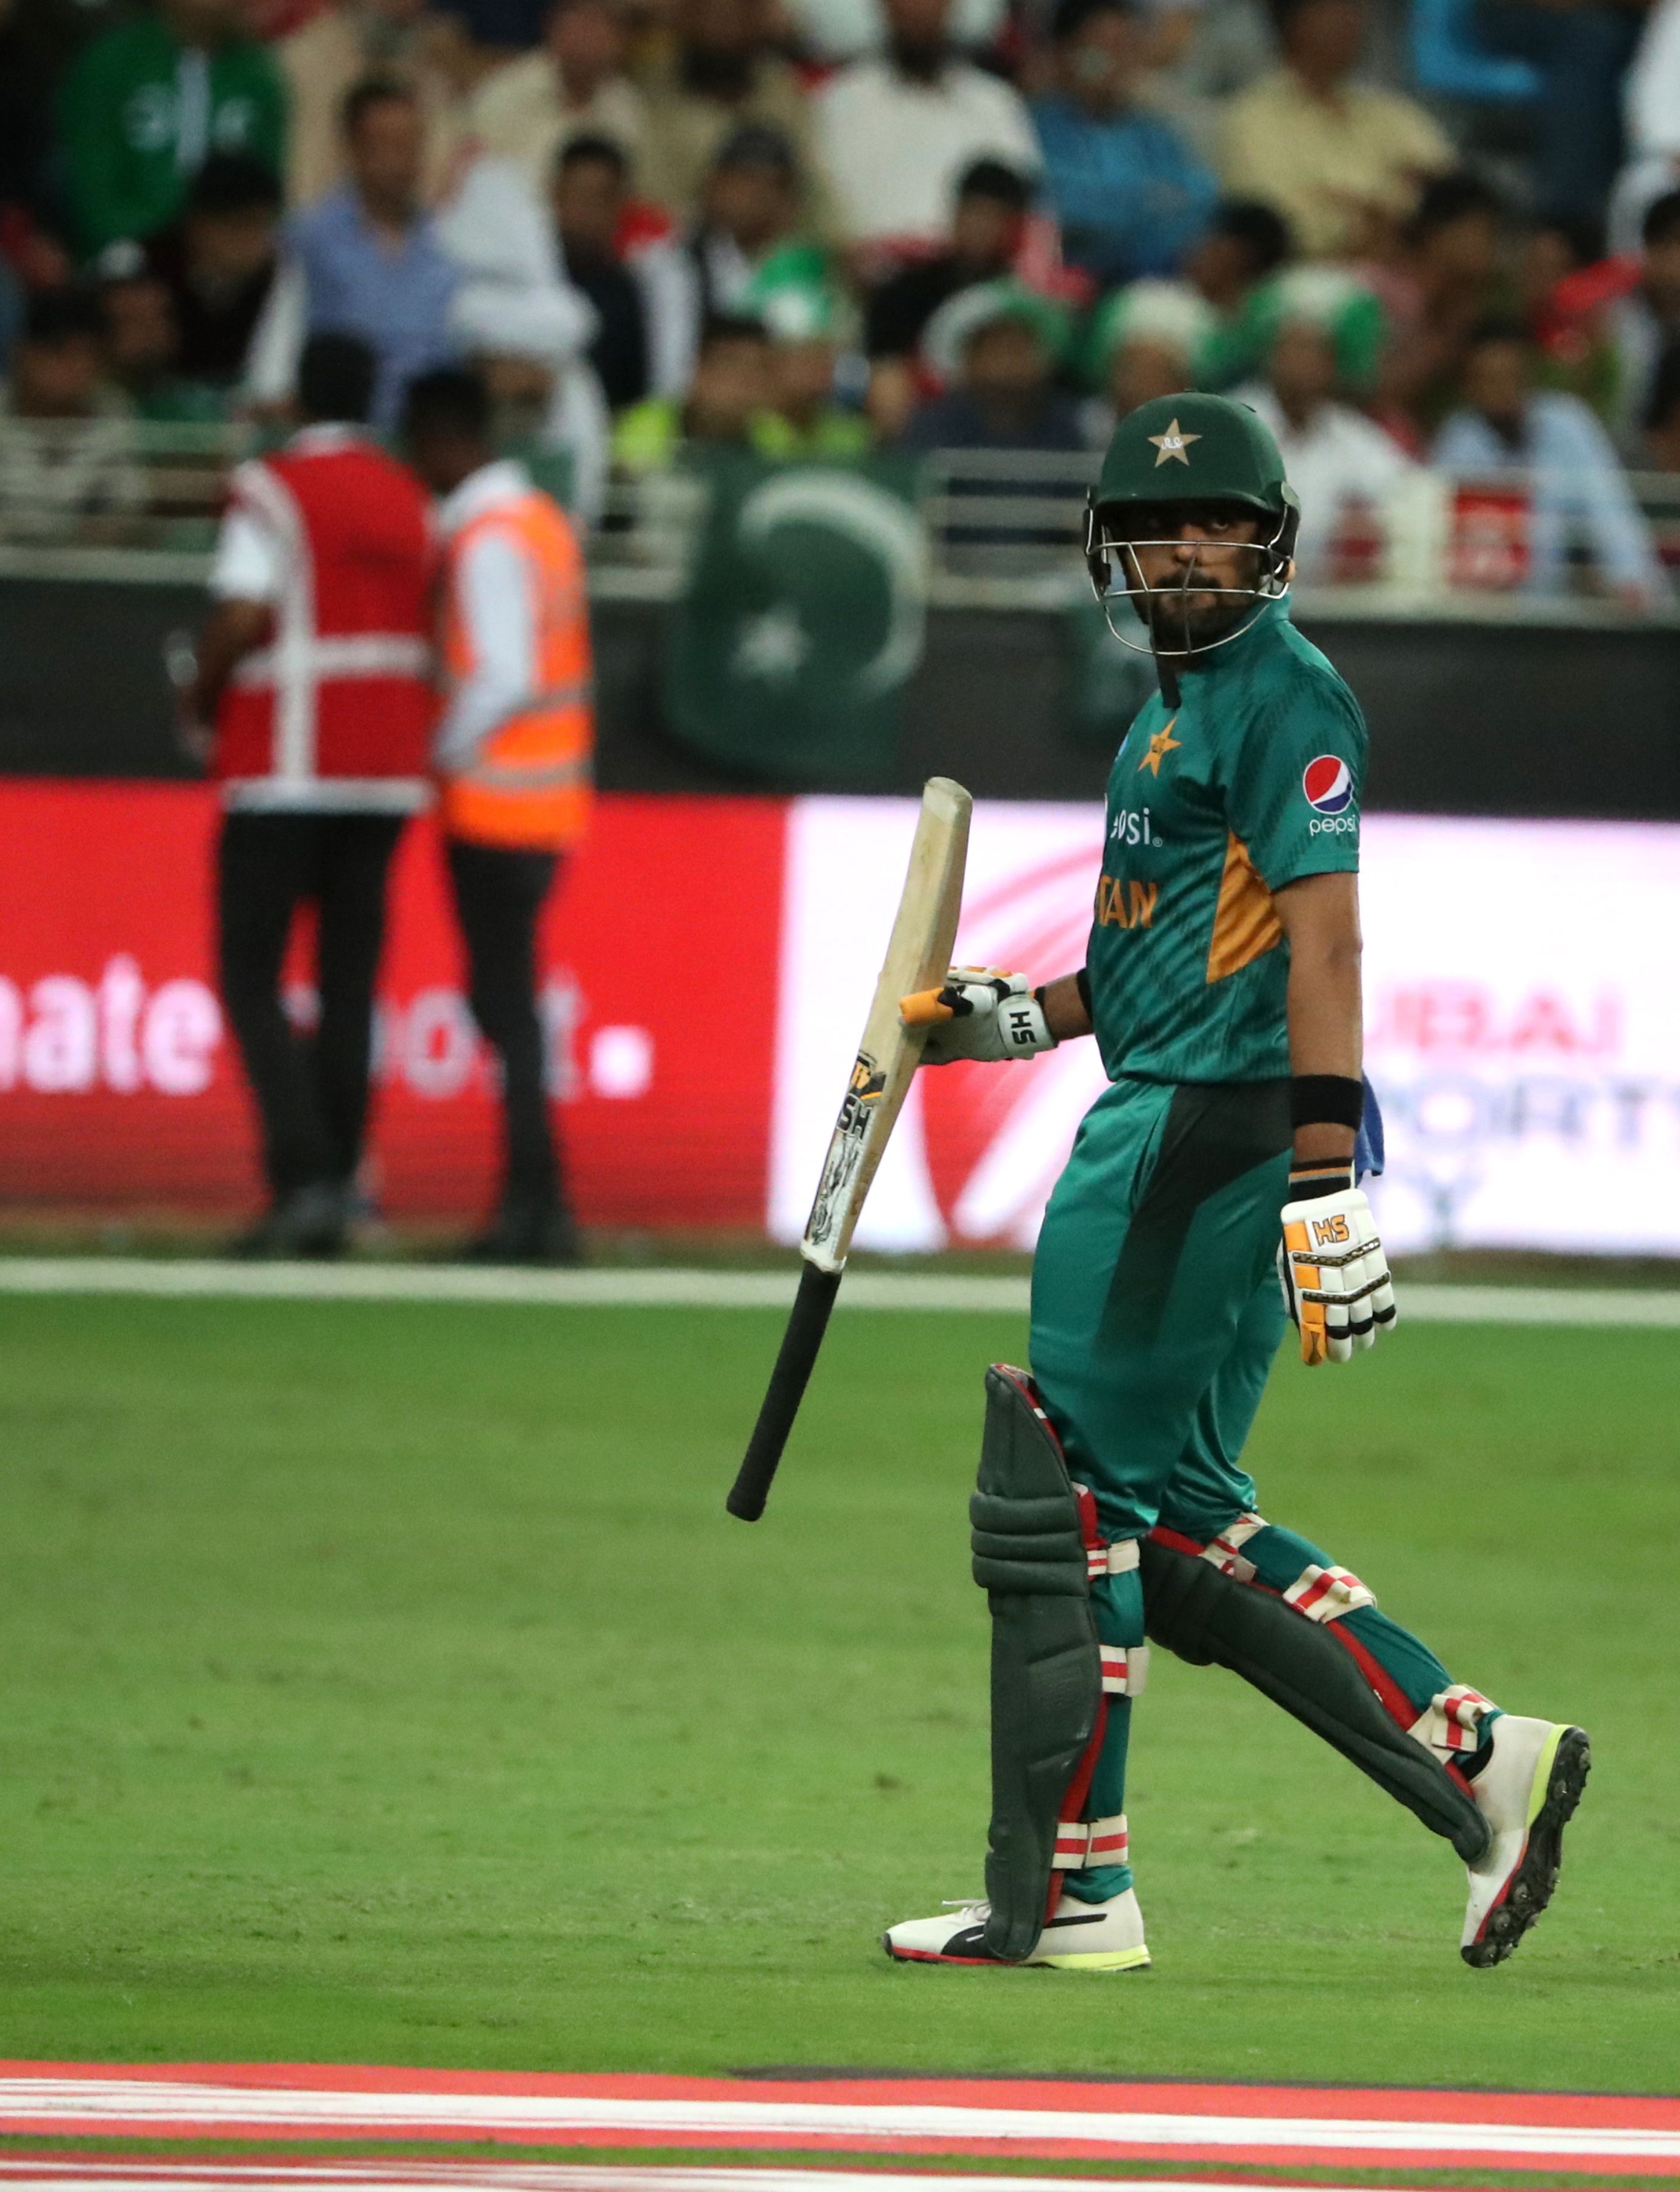 Pakistan beat New Zealand by six wickets to clinch T20 series